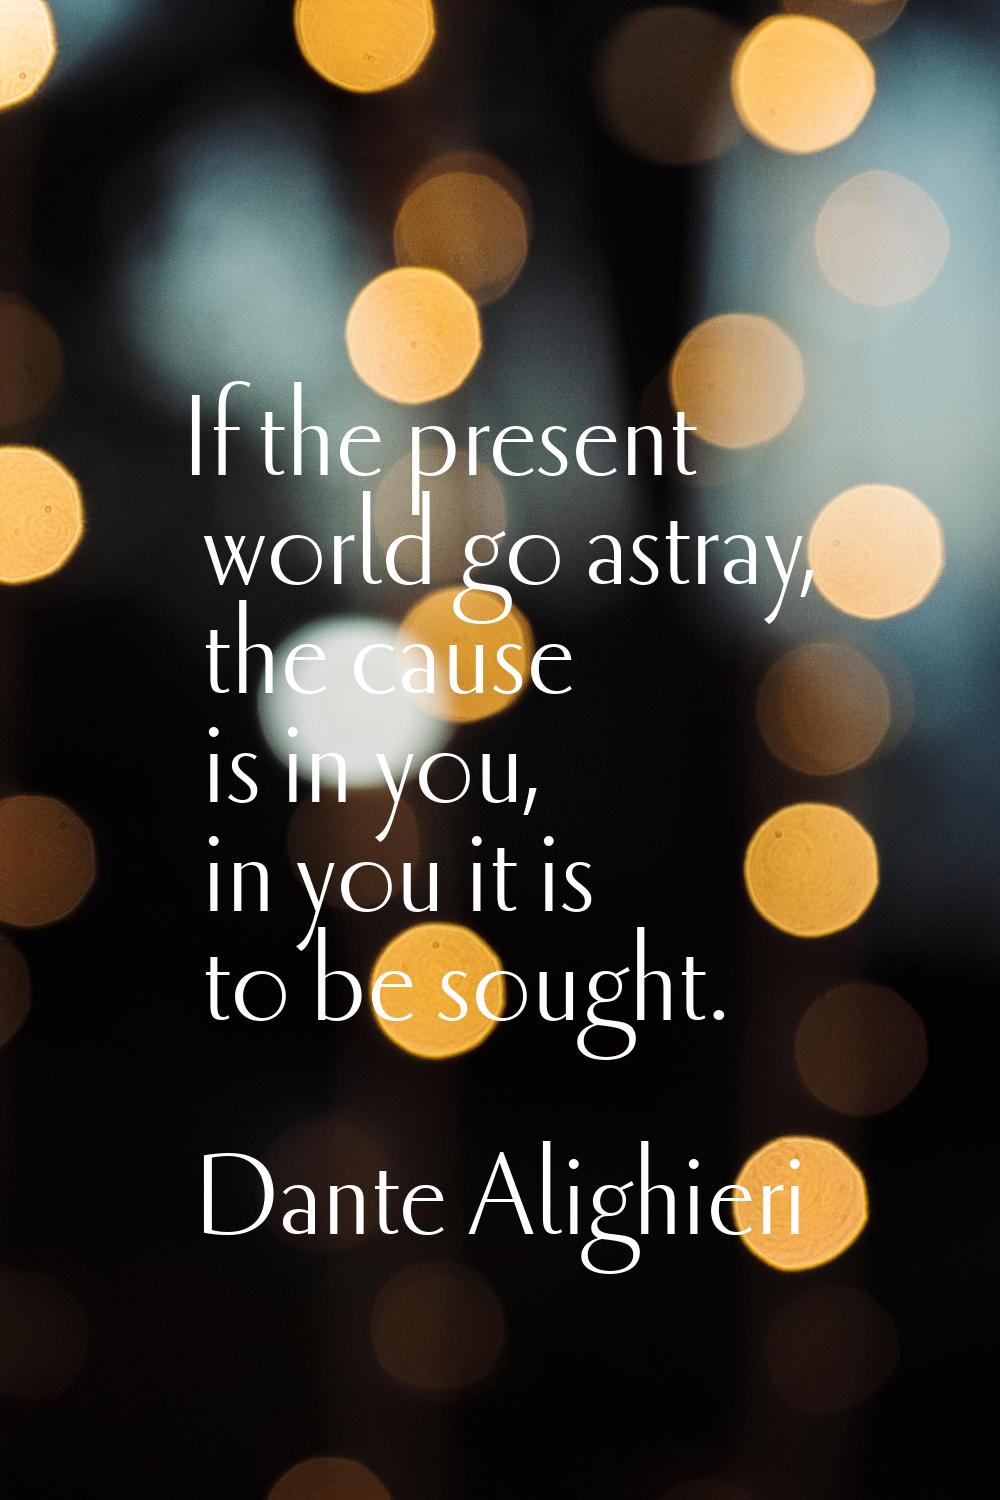 If the present world go astray, the cause is in you, in you it is to be sought.